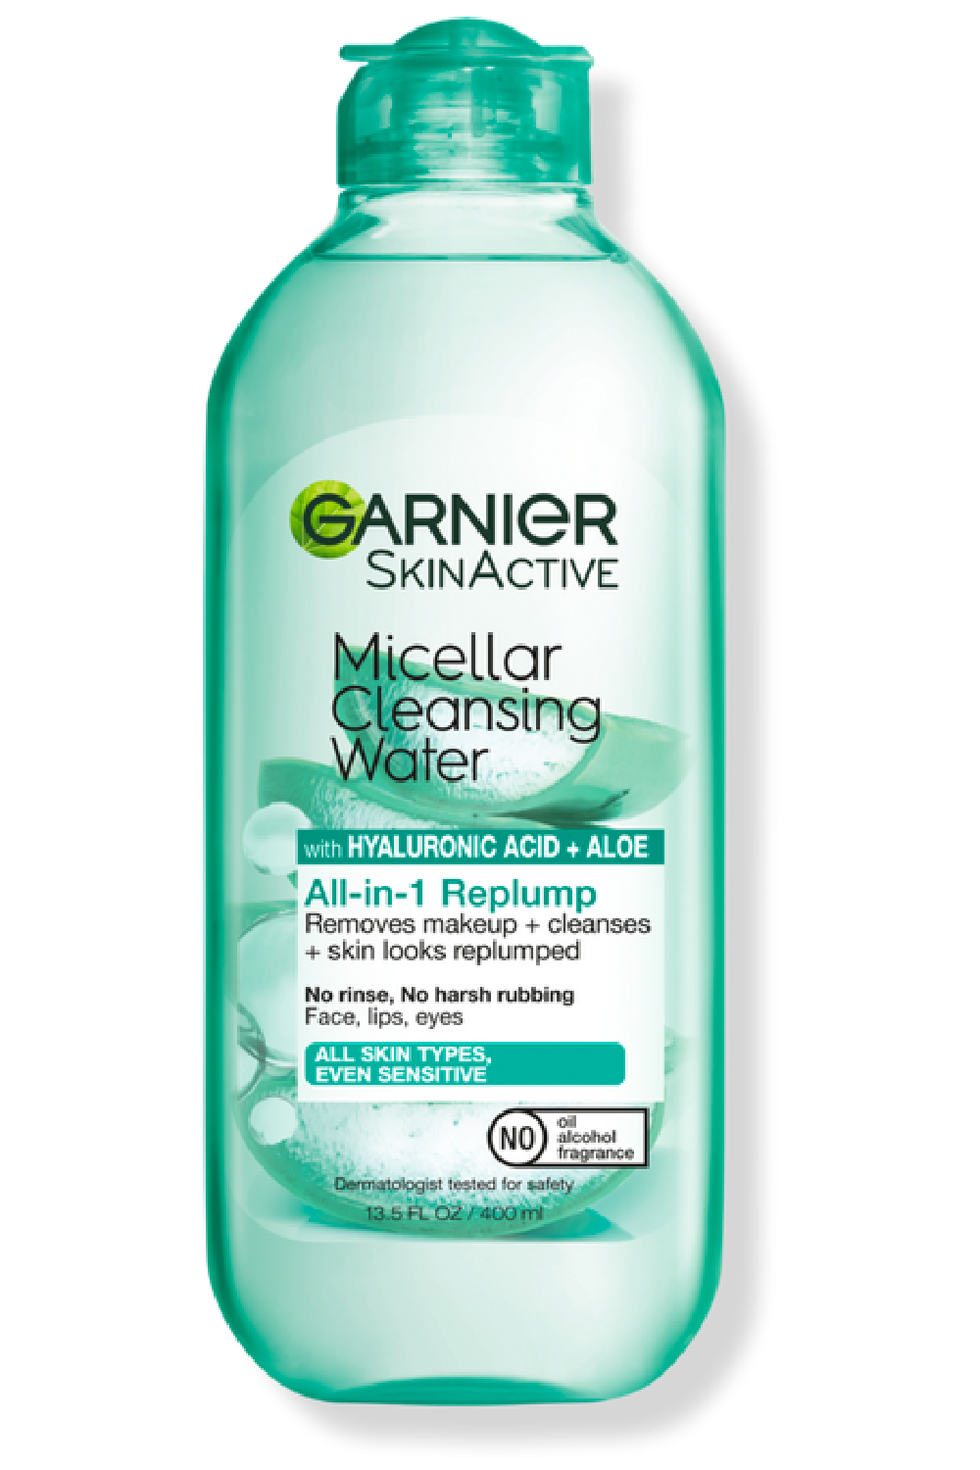 15 Best Makeup Removers for Every Skin Type